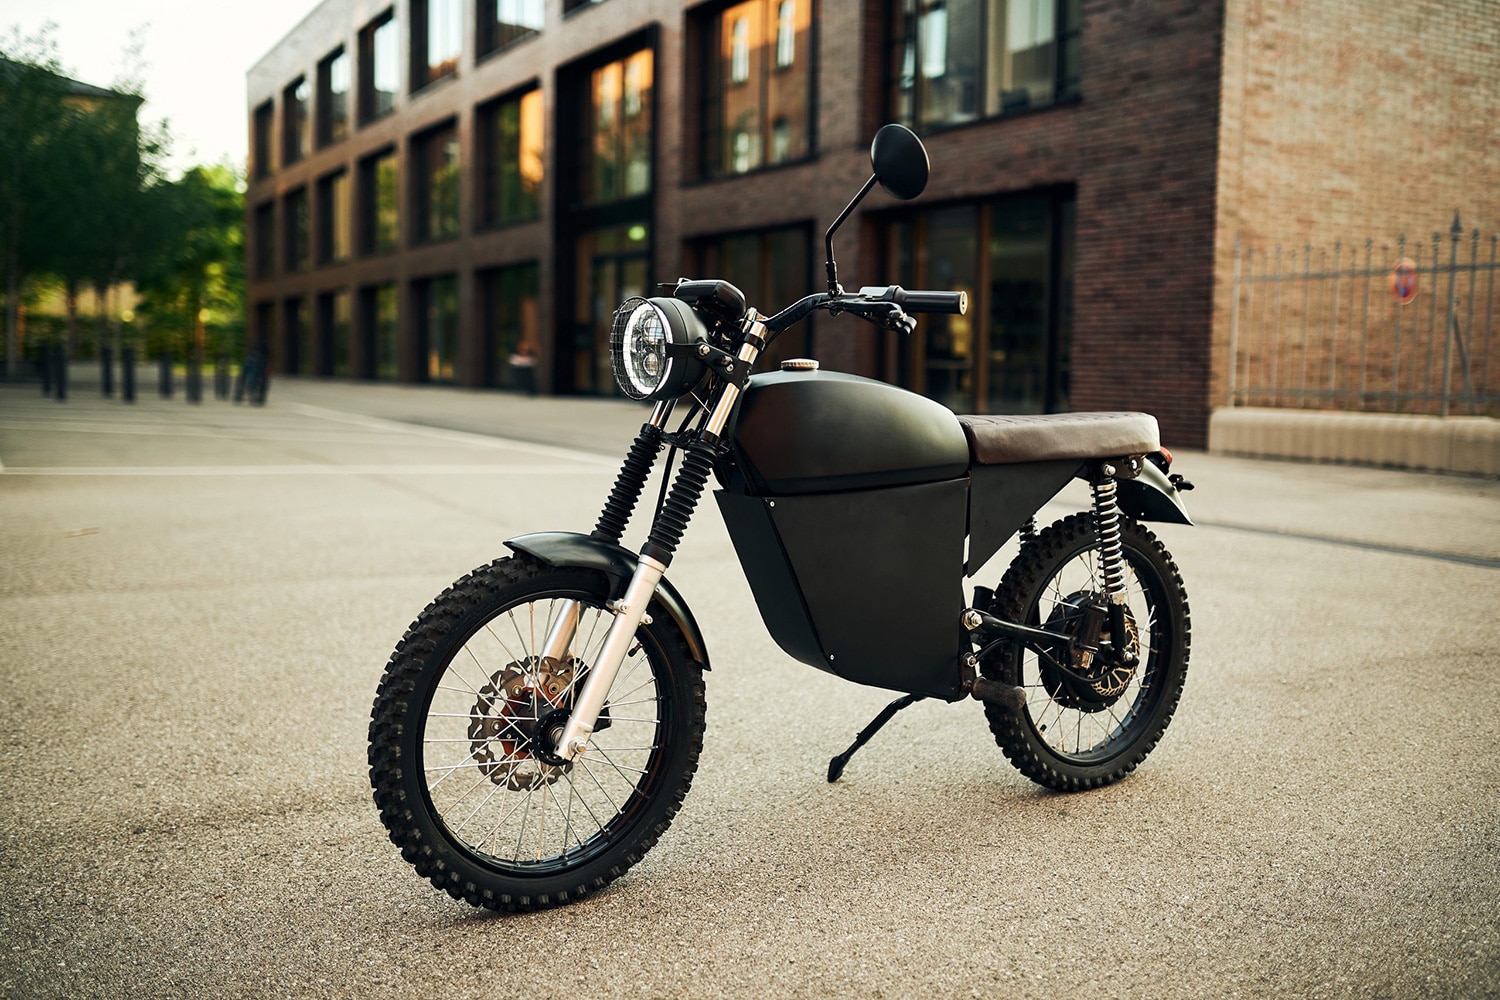 BlackTea Moped, a small 50 mph electric motorcycle with a vintage look.